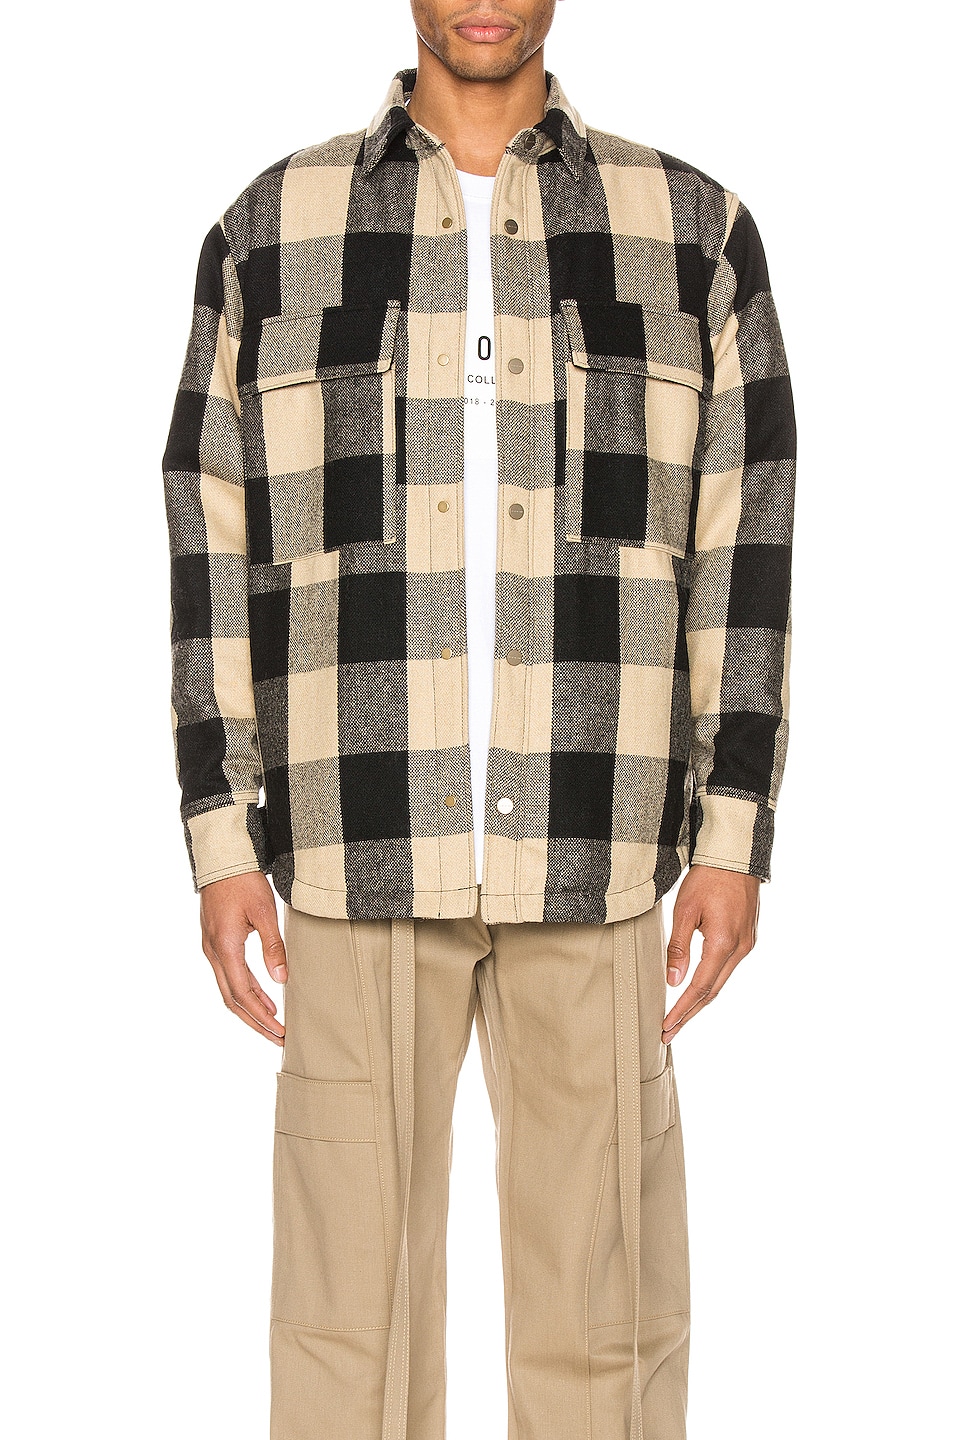 Image 1 of Fear of God Oversized Check Shirt Jacket in Black & Cream Oversized Check